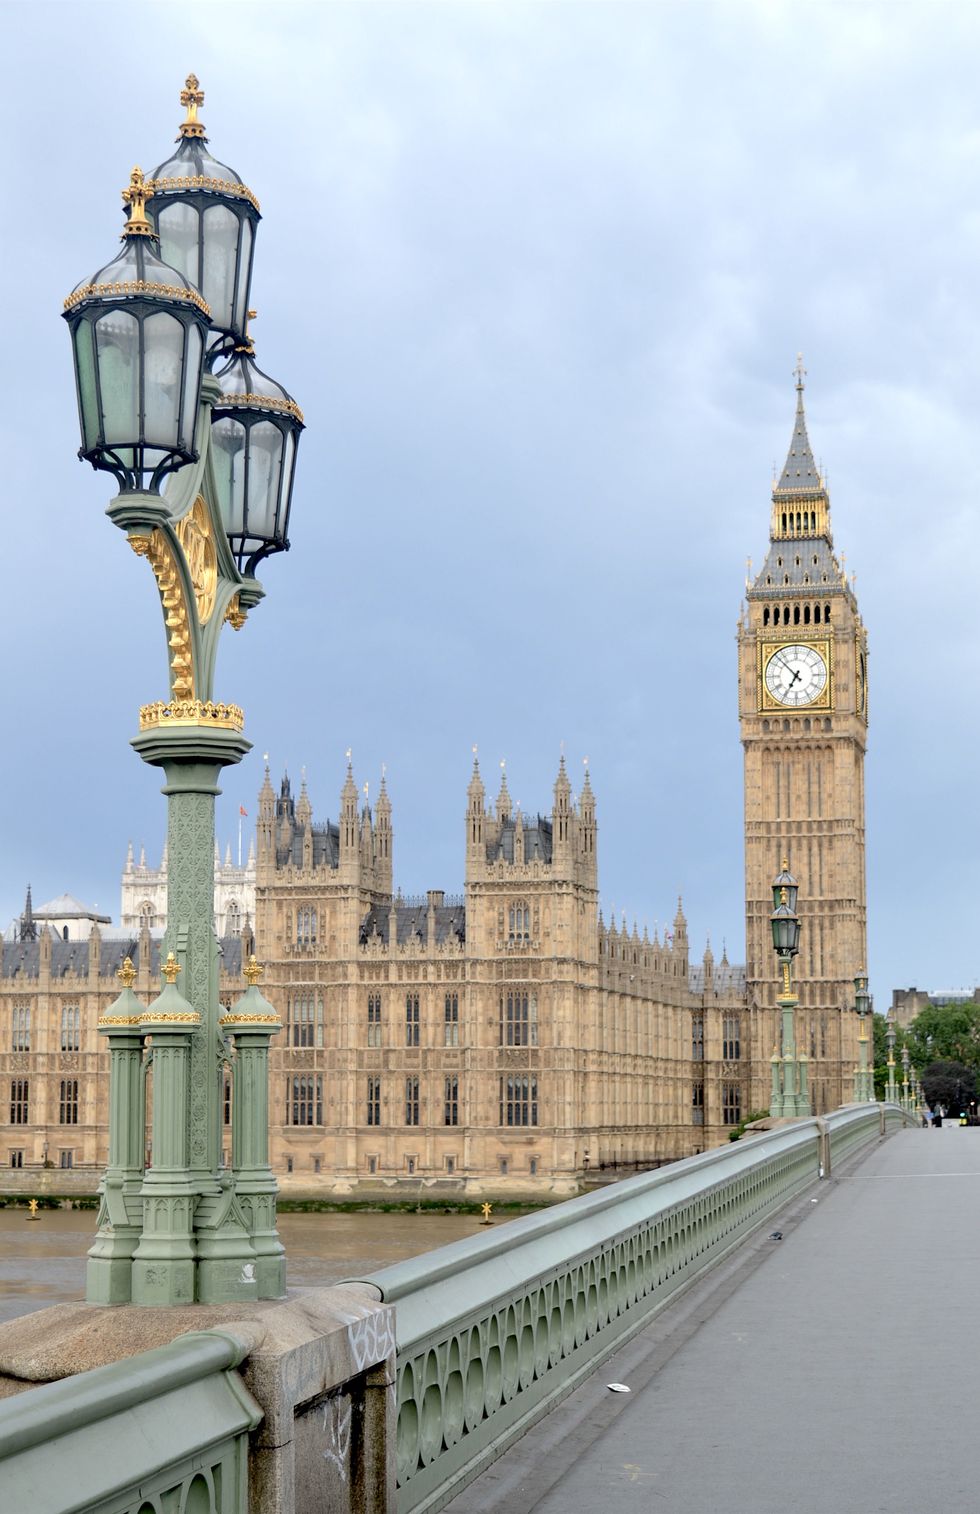 <p>Contrary to popular belief, Big Ben is actually the nickname for the Great Bell of the clock placed in the tower, but often extended to refer to the clock and the clock tower. The tower is actually officially known as Elizabeth Tower, renamed to celebrate the Diamond Jubilee of Elizabeth II in 2012.  </p>